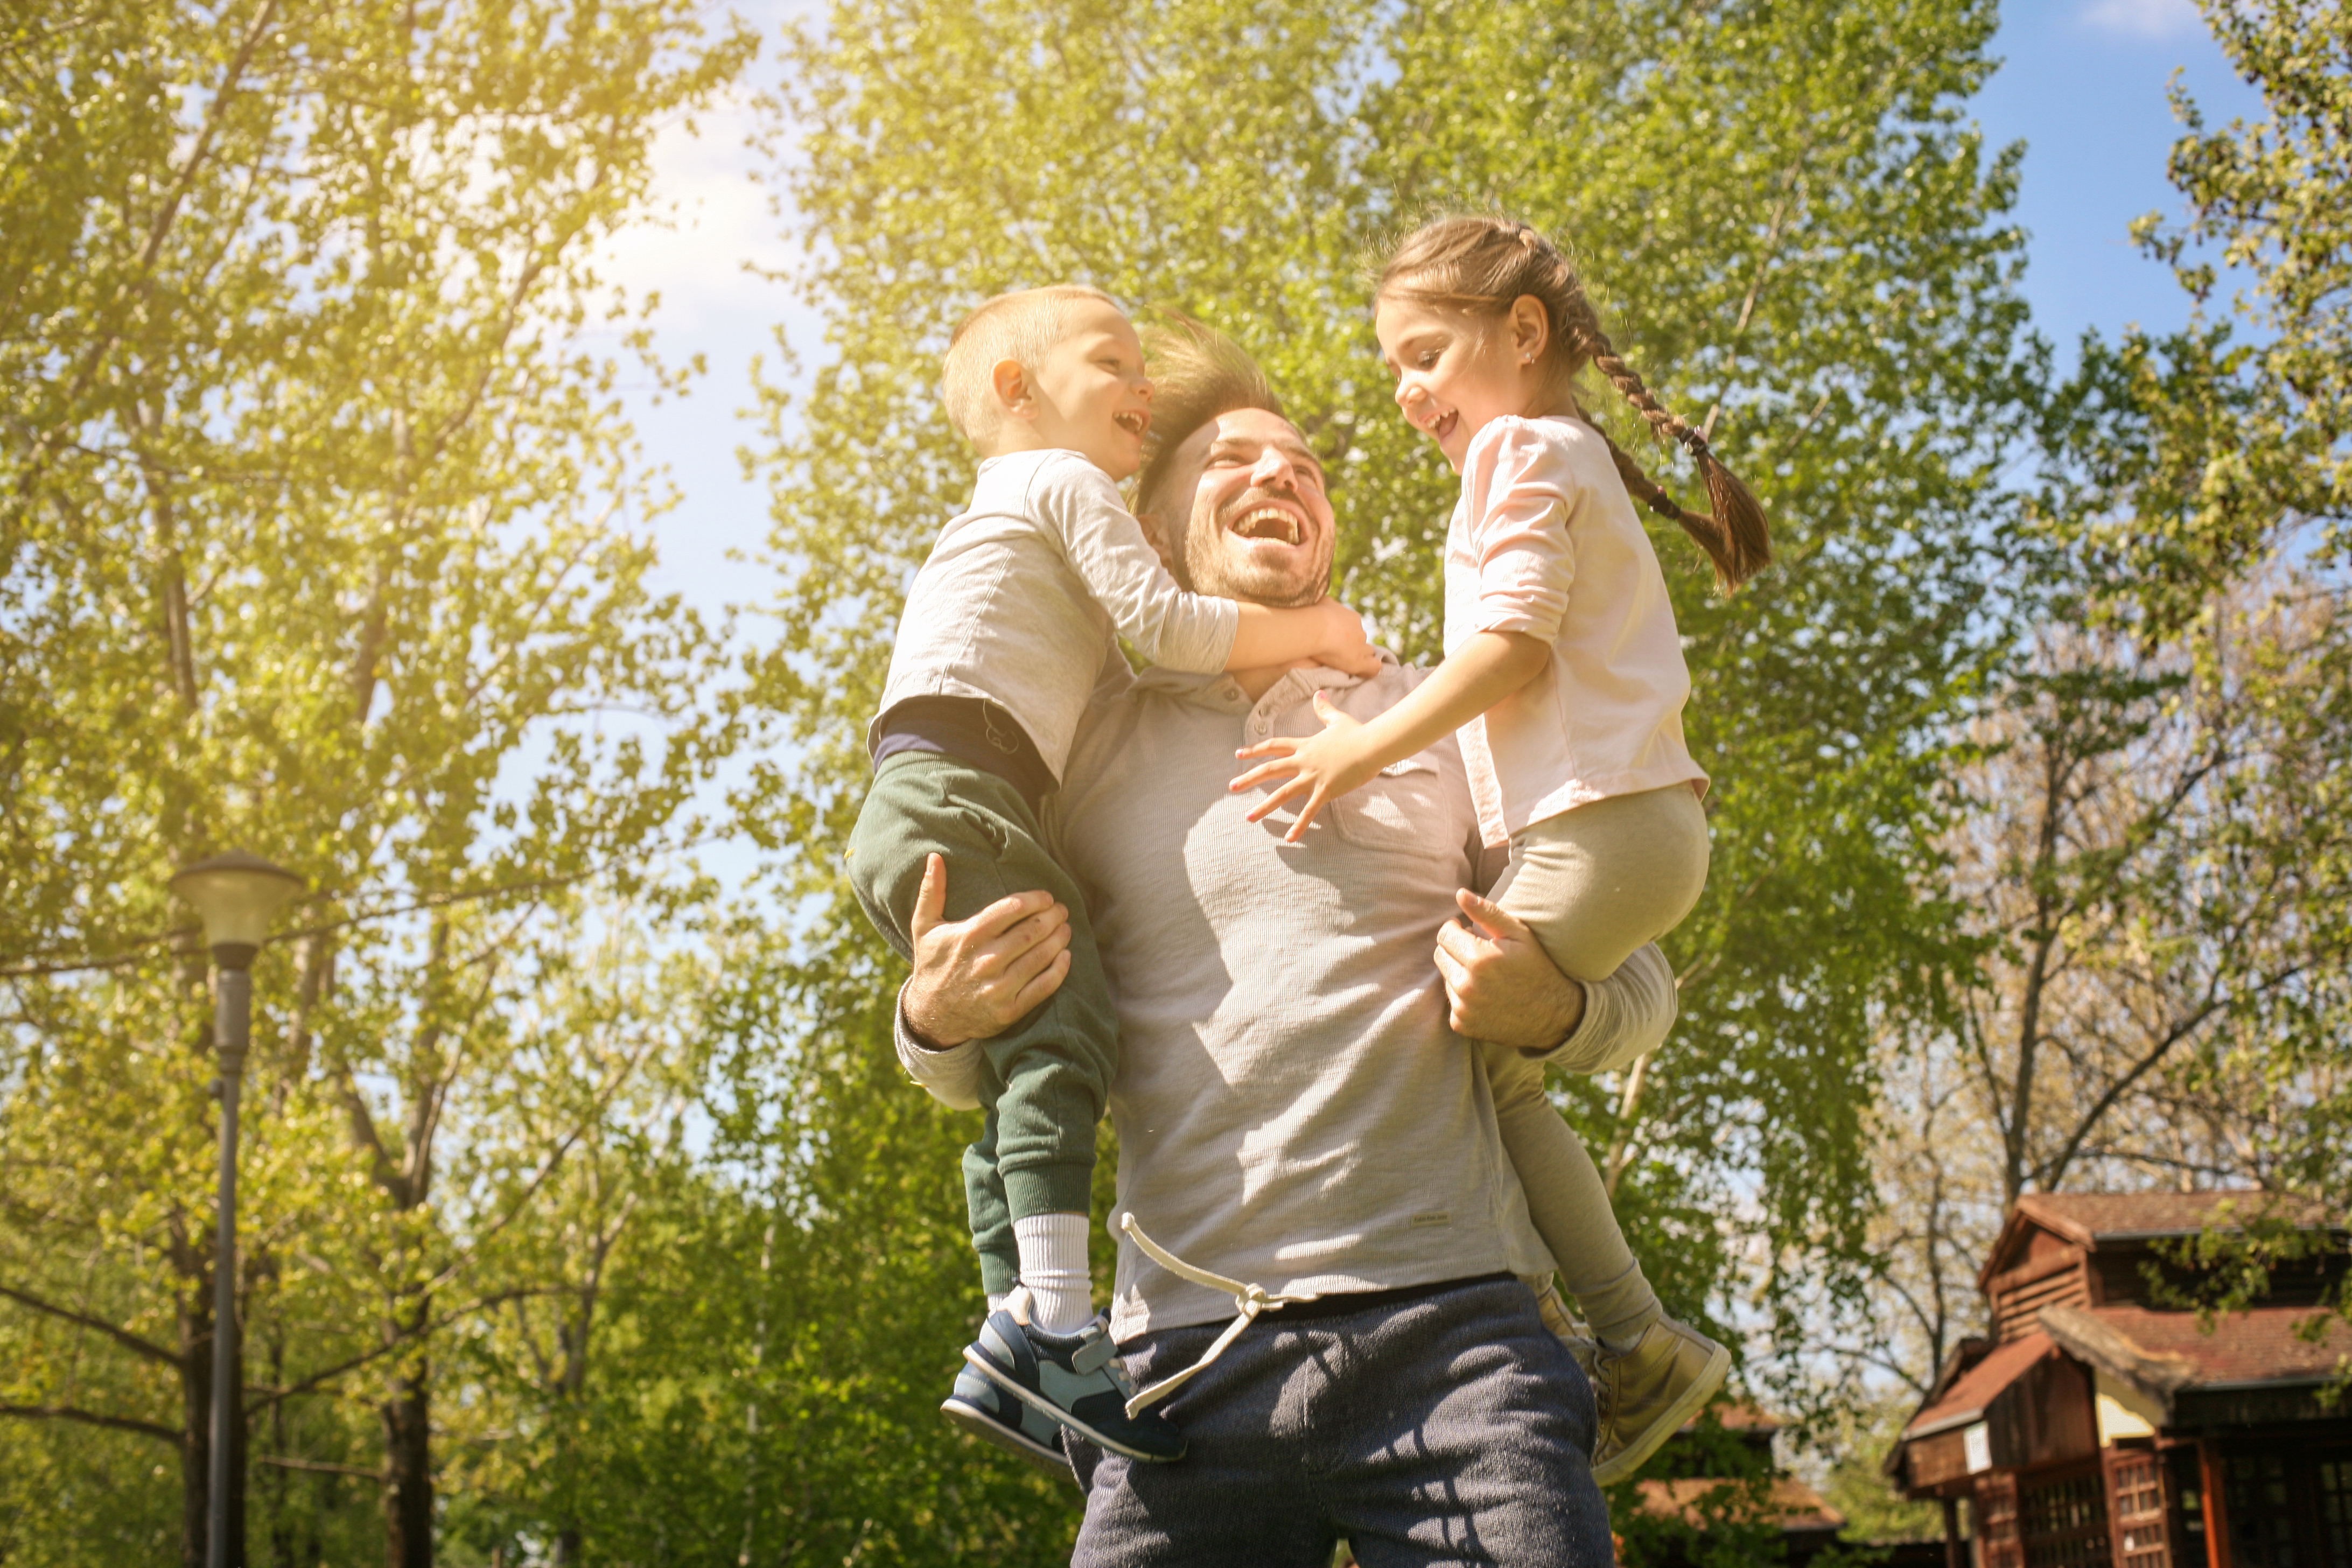 A father with two kids | Source: Shutterstock